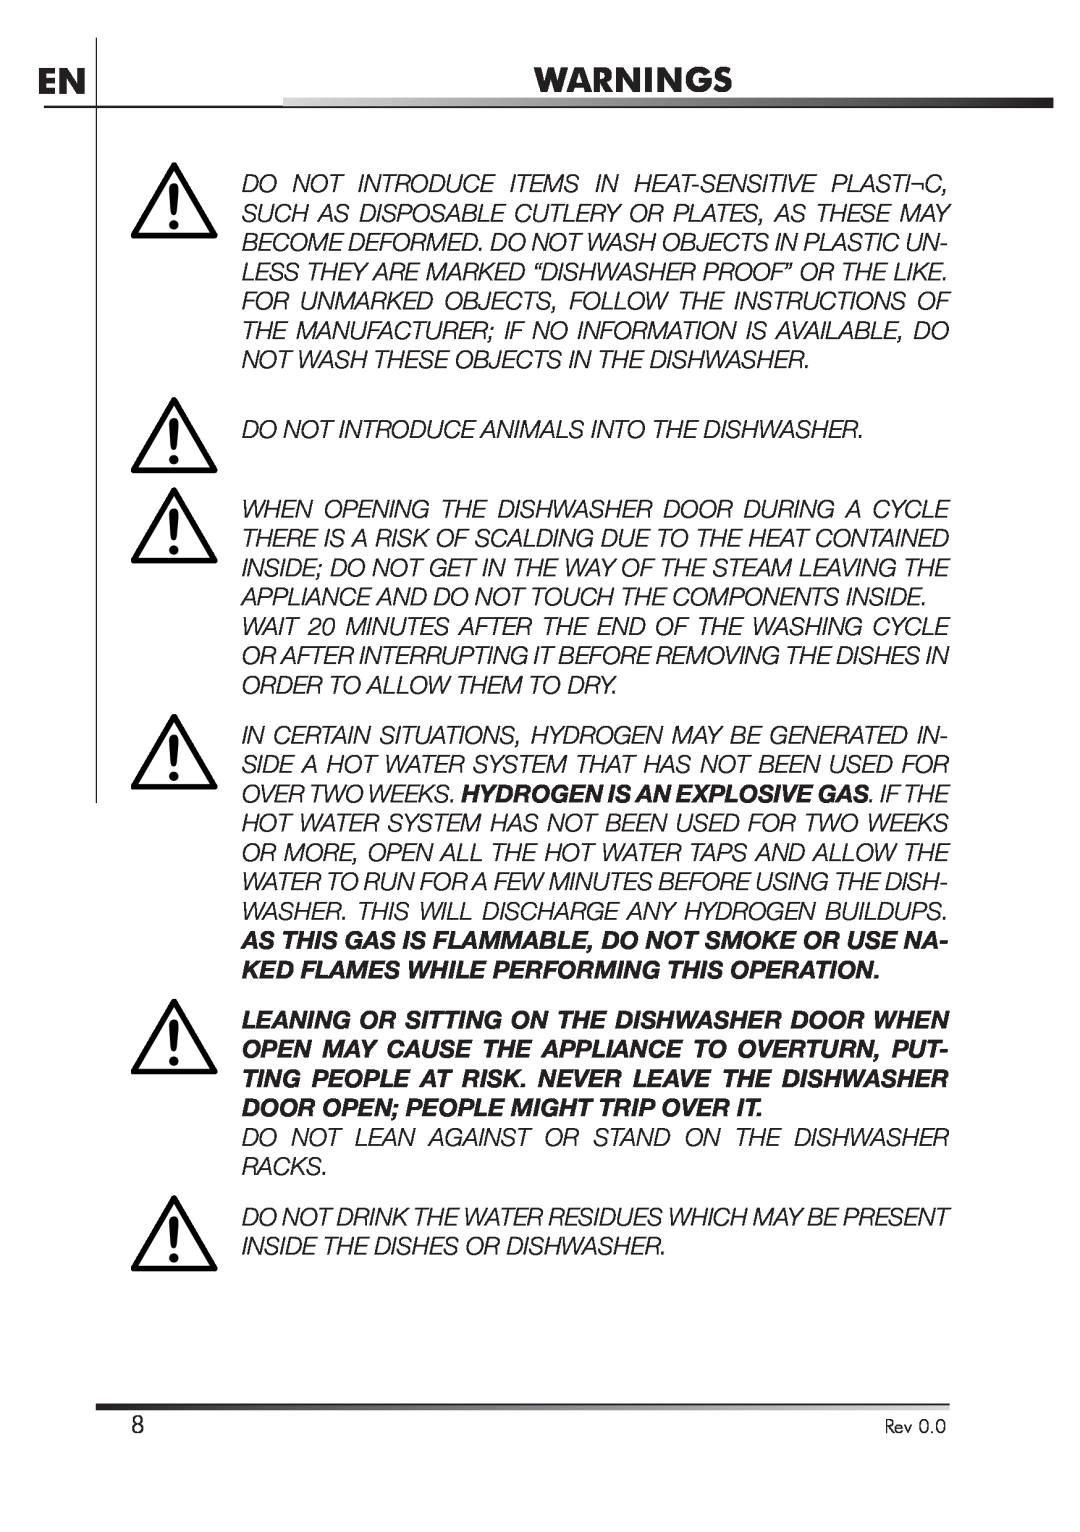 Smeg STA4645 Warnings, Do Not Introduce Animals Into The Dishwasher, Do Not Lean Against Or Stand On The Dishwasher Racks 